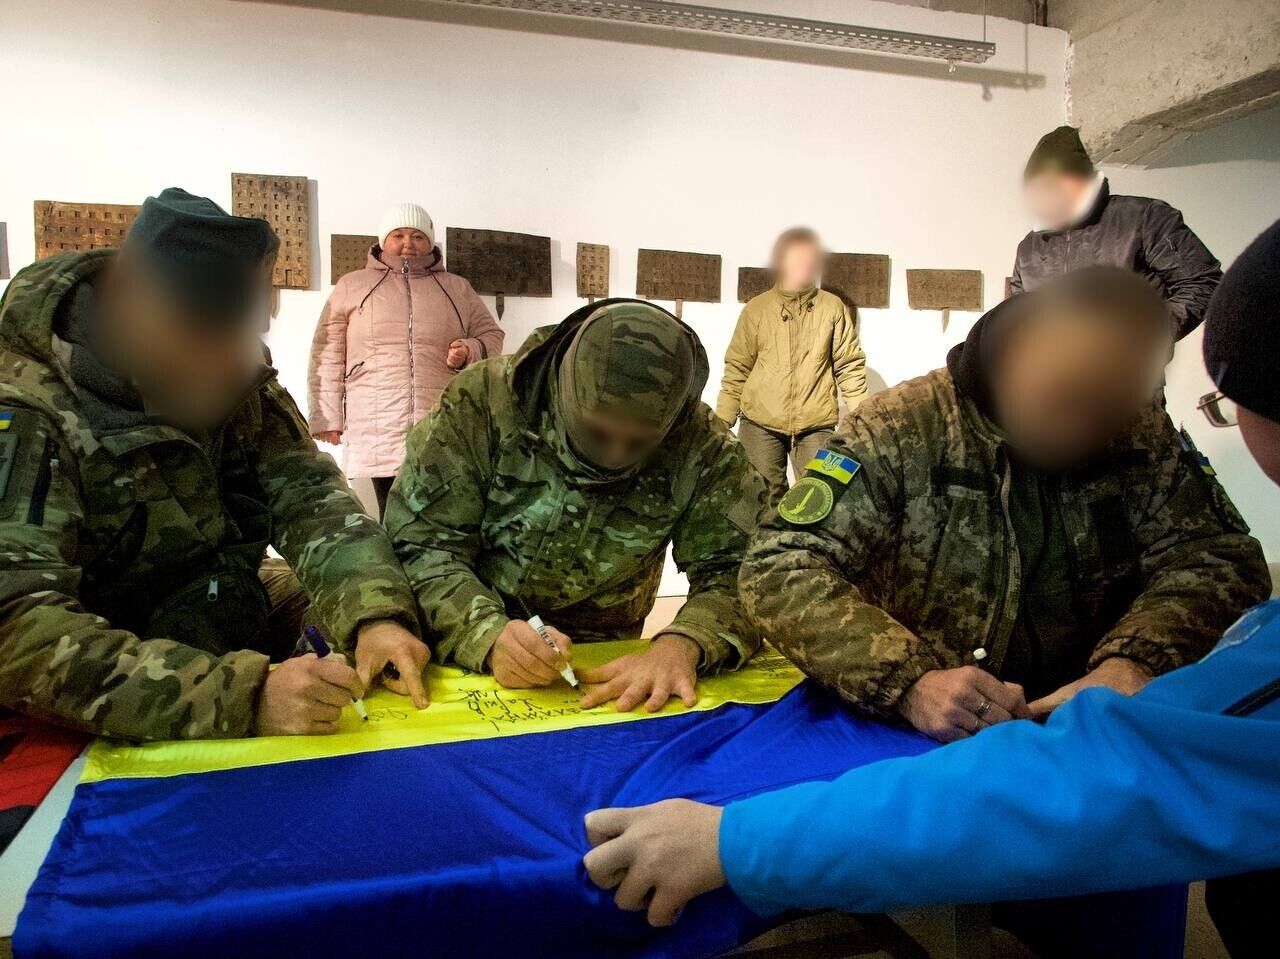 Ukraine Flag signed by Ukranian Armed Forces 53 brigade with patches